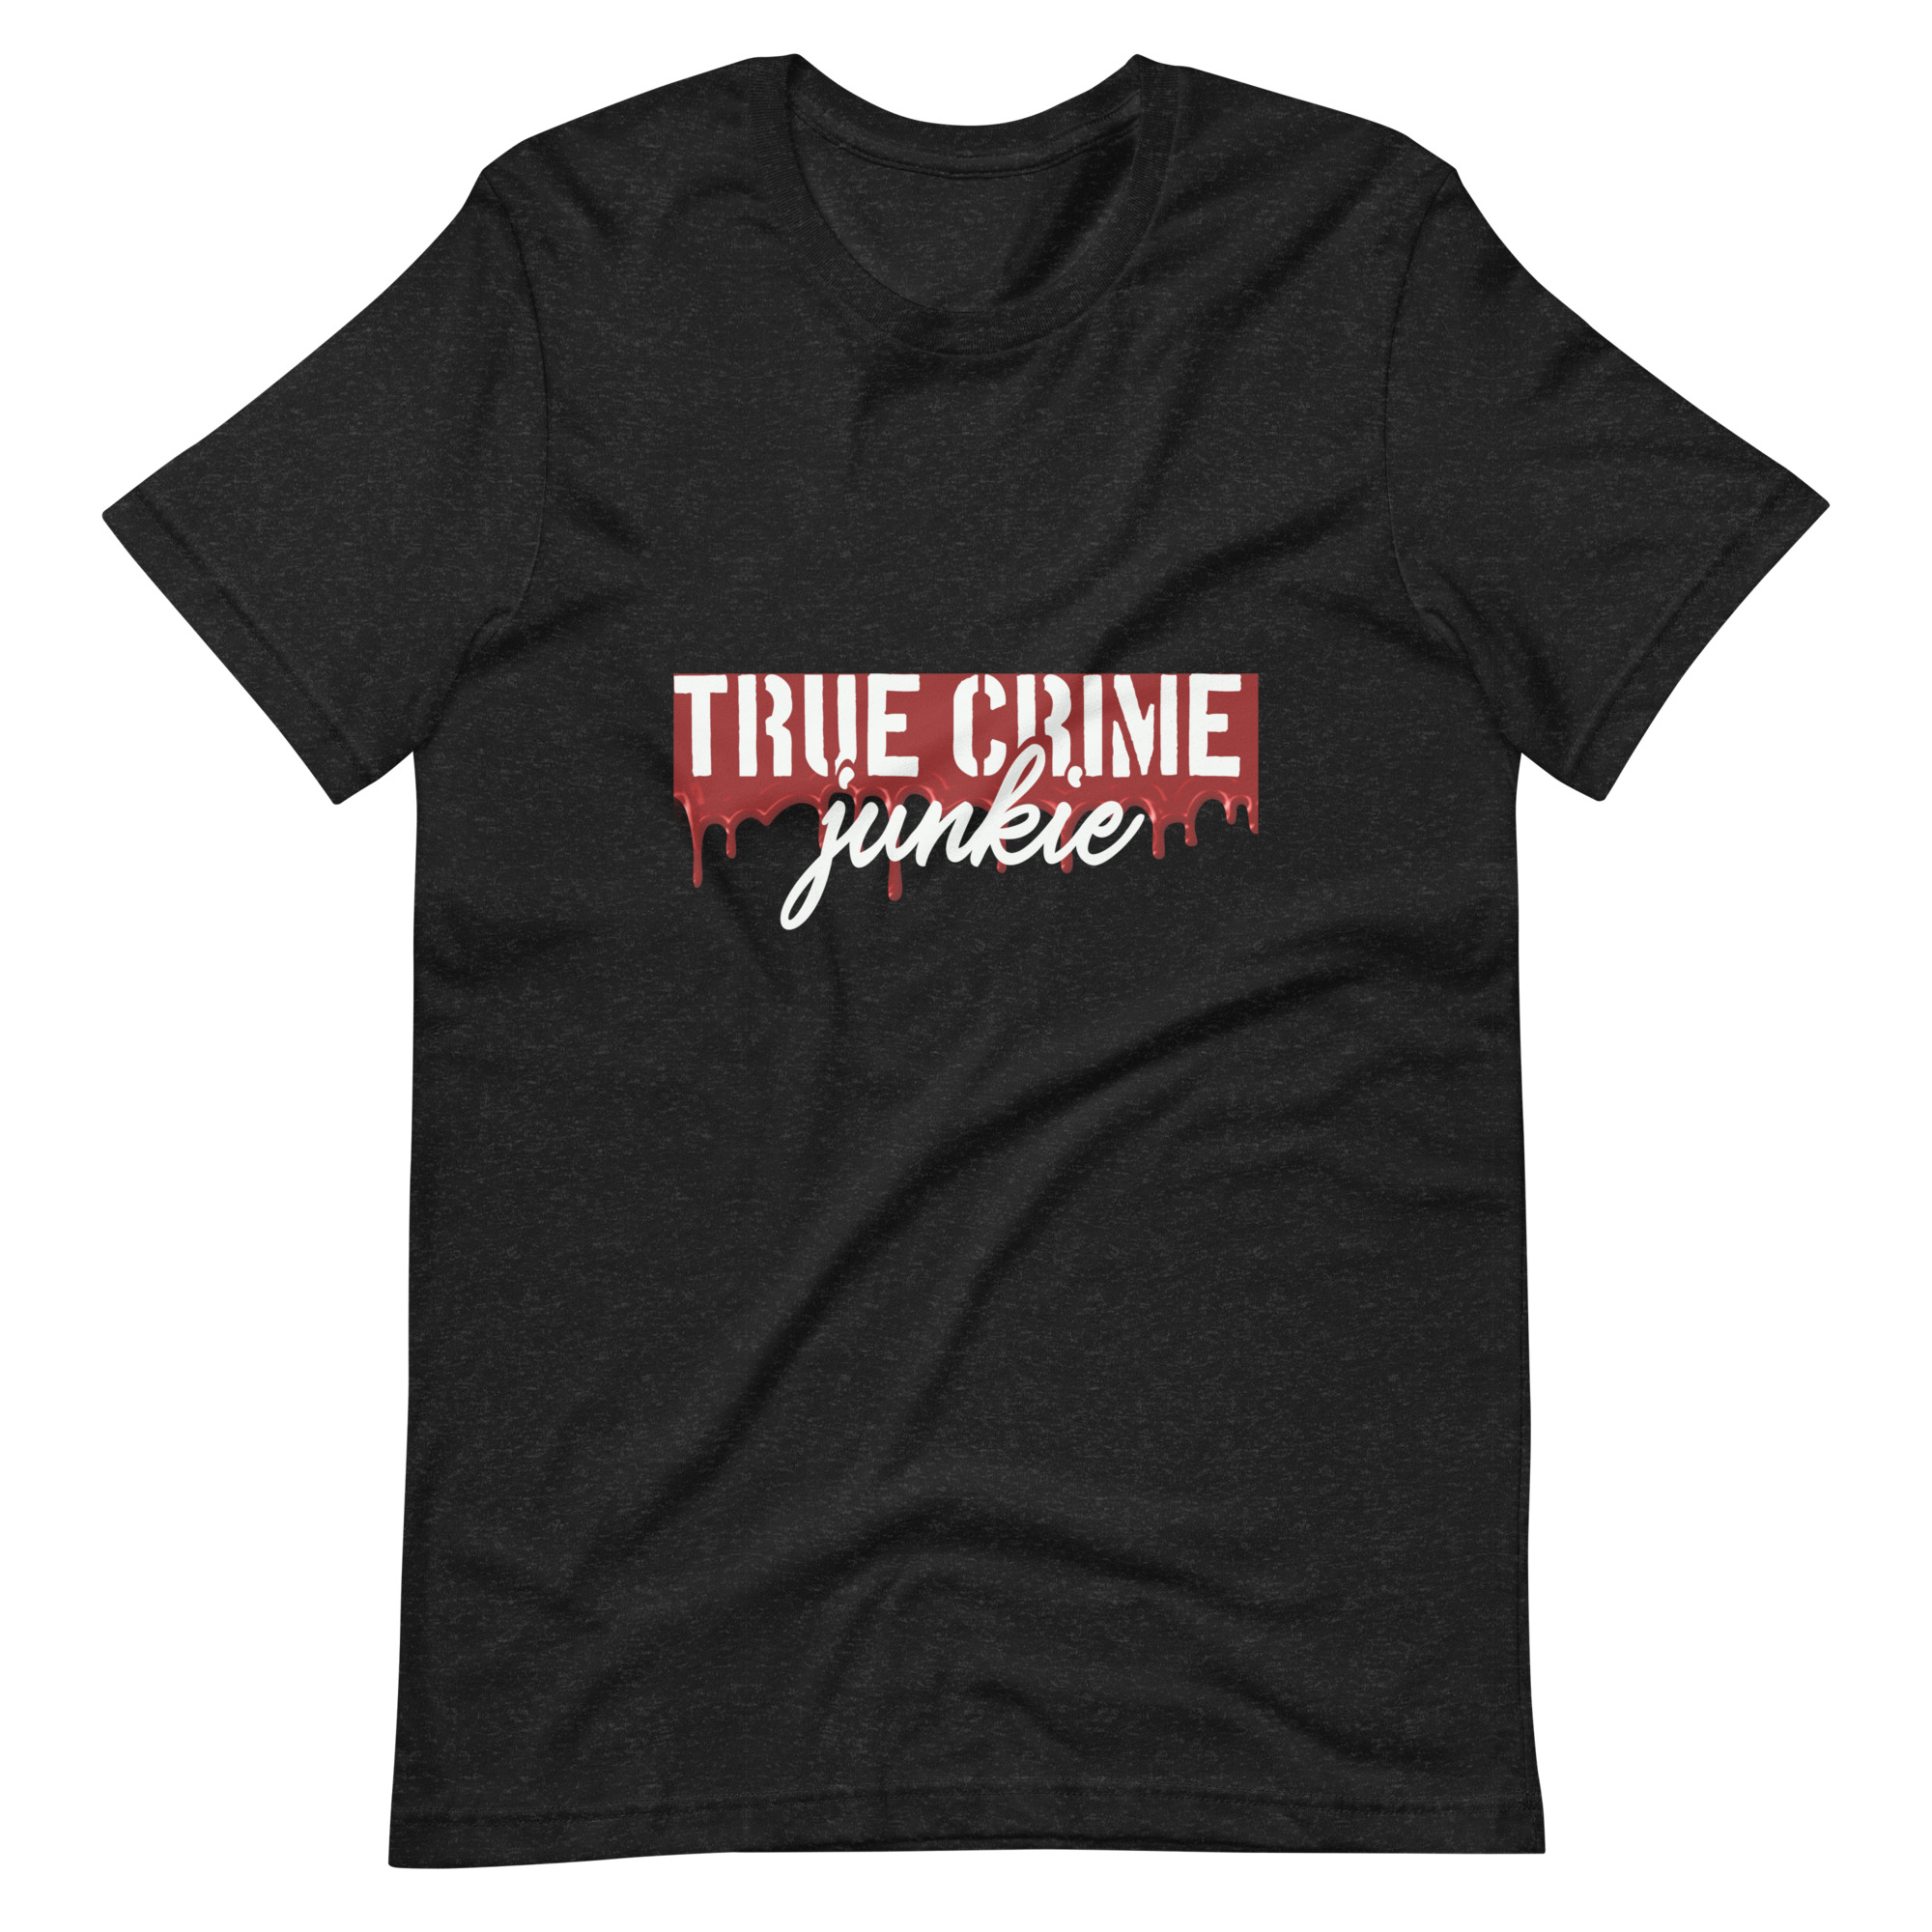 Uncover the Dark Side: True Crime T-Shirts for the Ultimate Crime Enthusiast